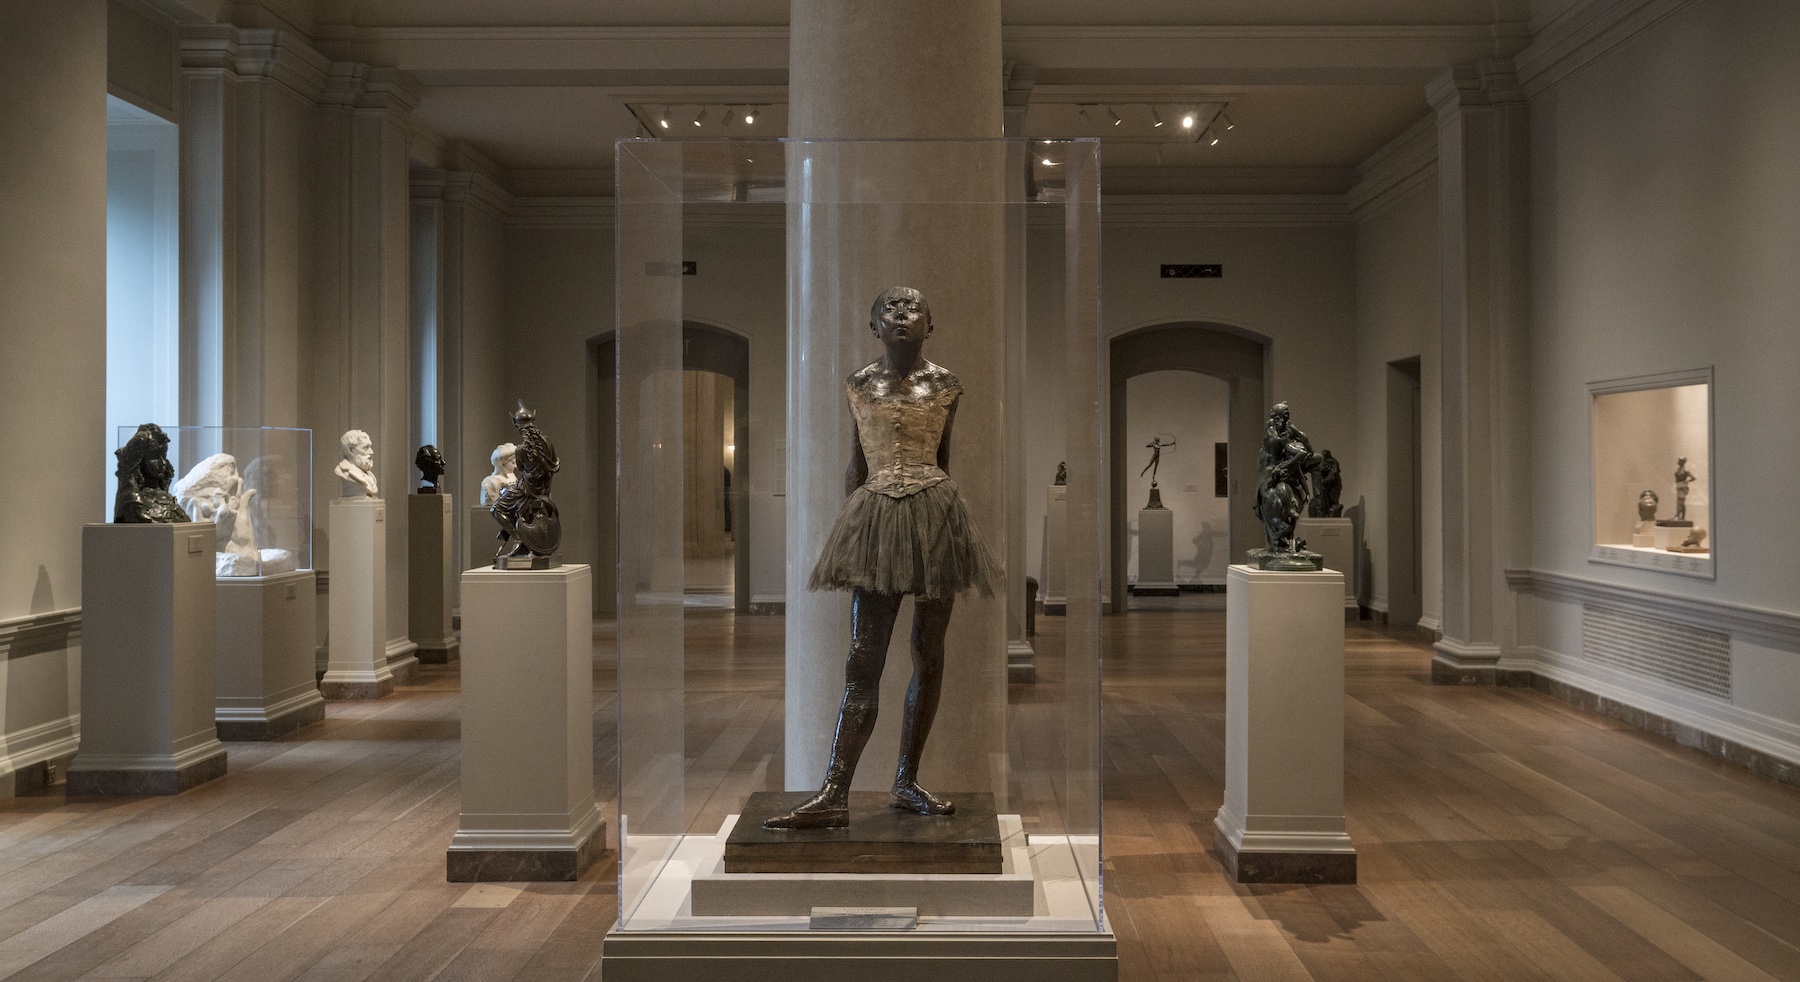 Photograph of Degas's "Little Dancer" on display at the National Gallery of Art